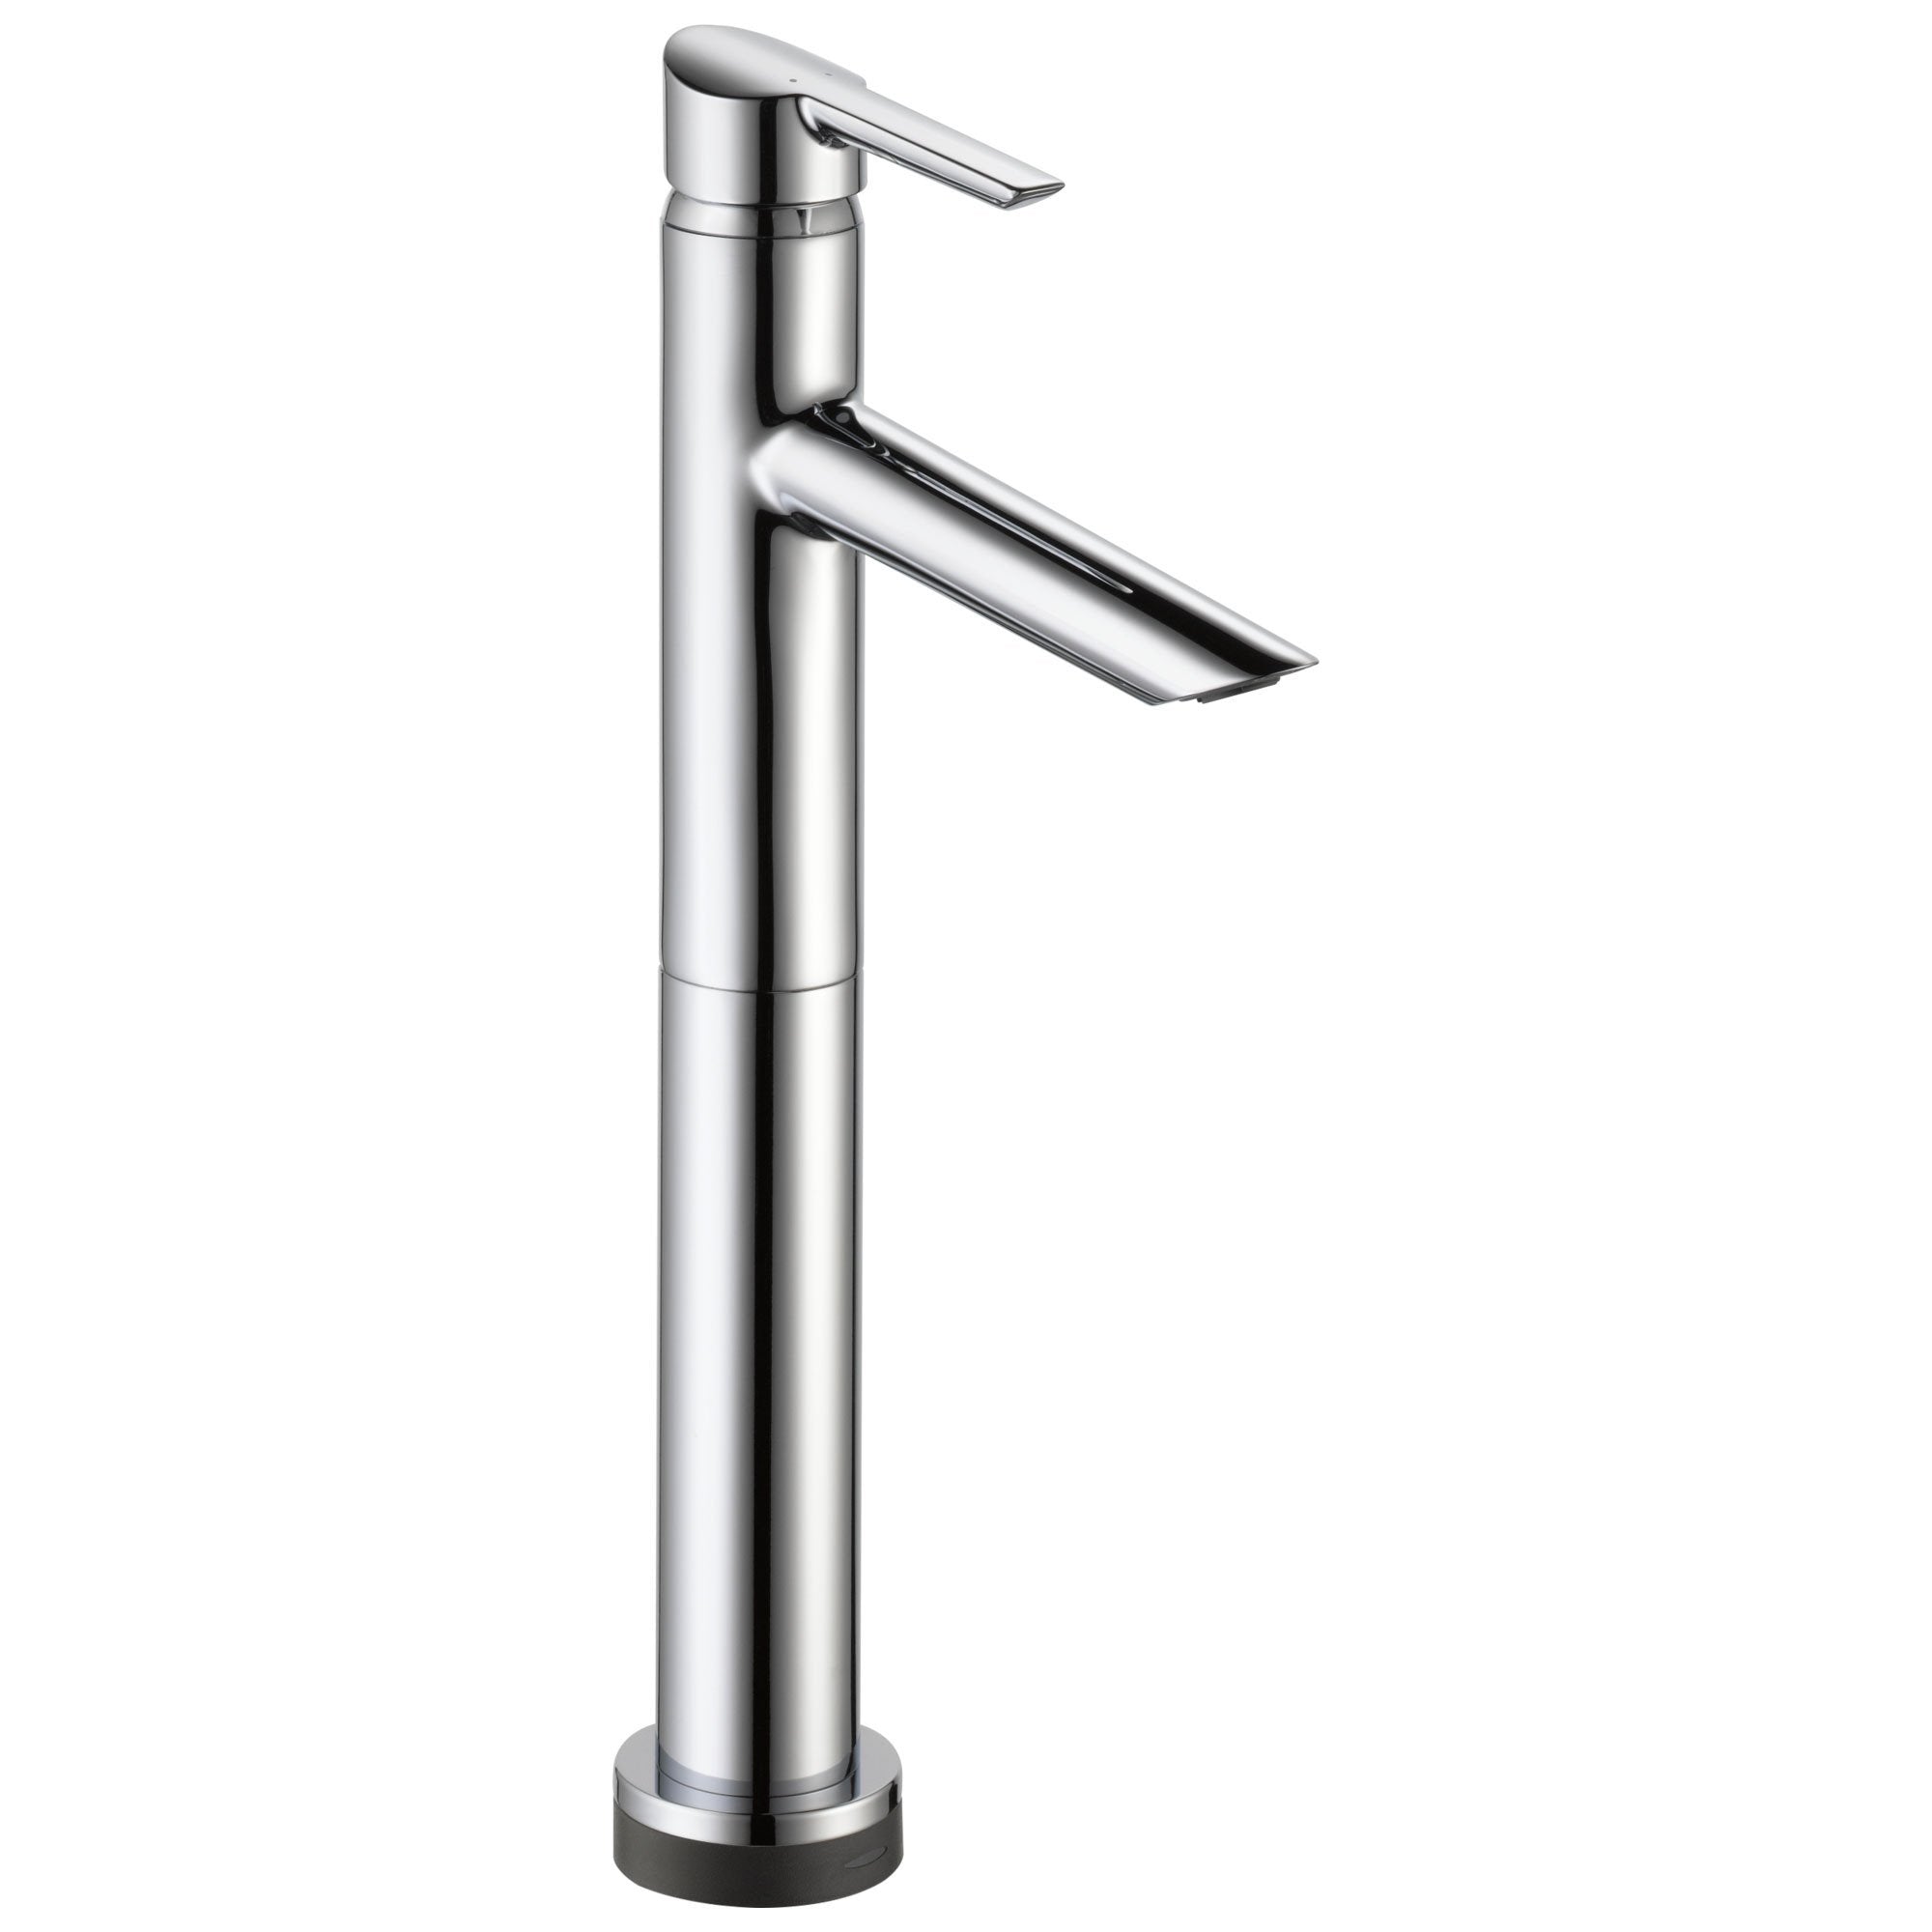 Delta Compel Collection Chrome Finish Single Handle Tall Electronic Vessel Lavatory Sink Faucet with Touch2Oxt Technology 731014